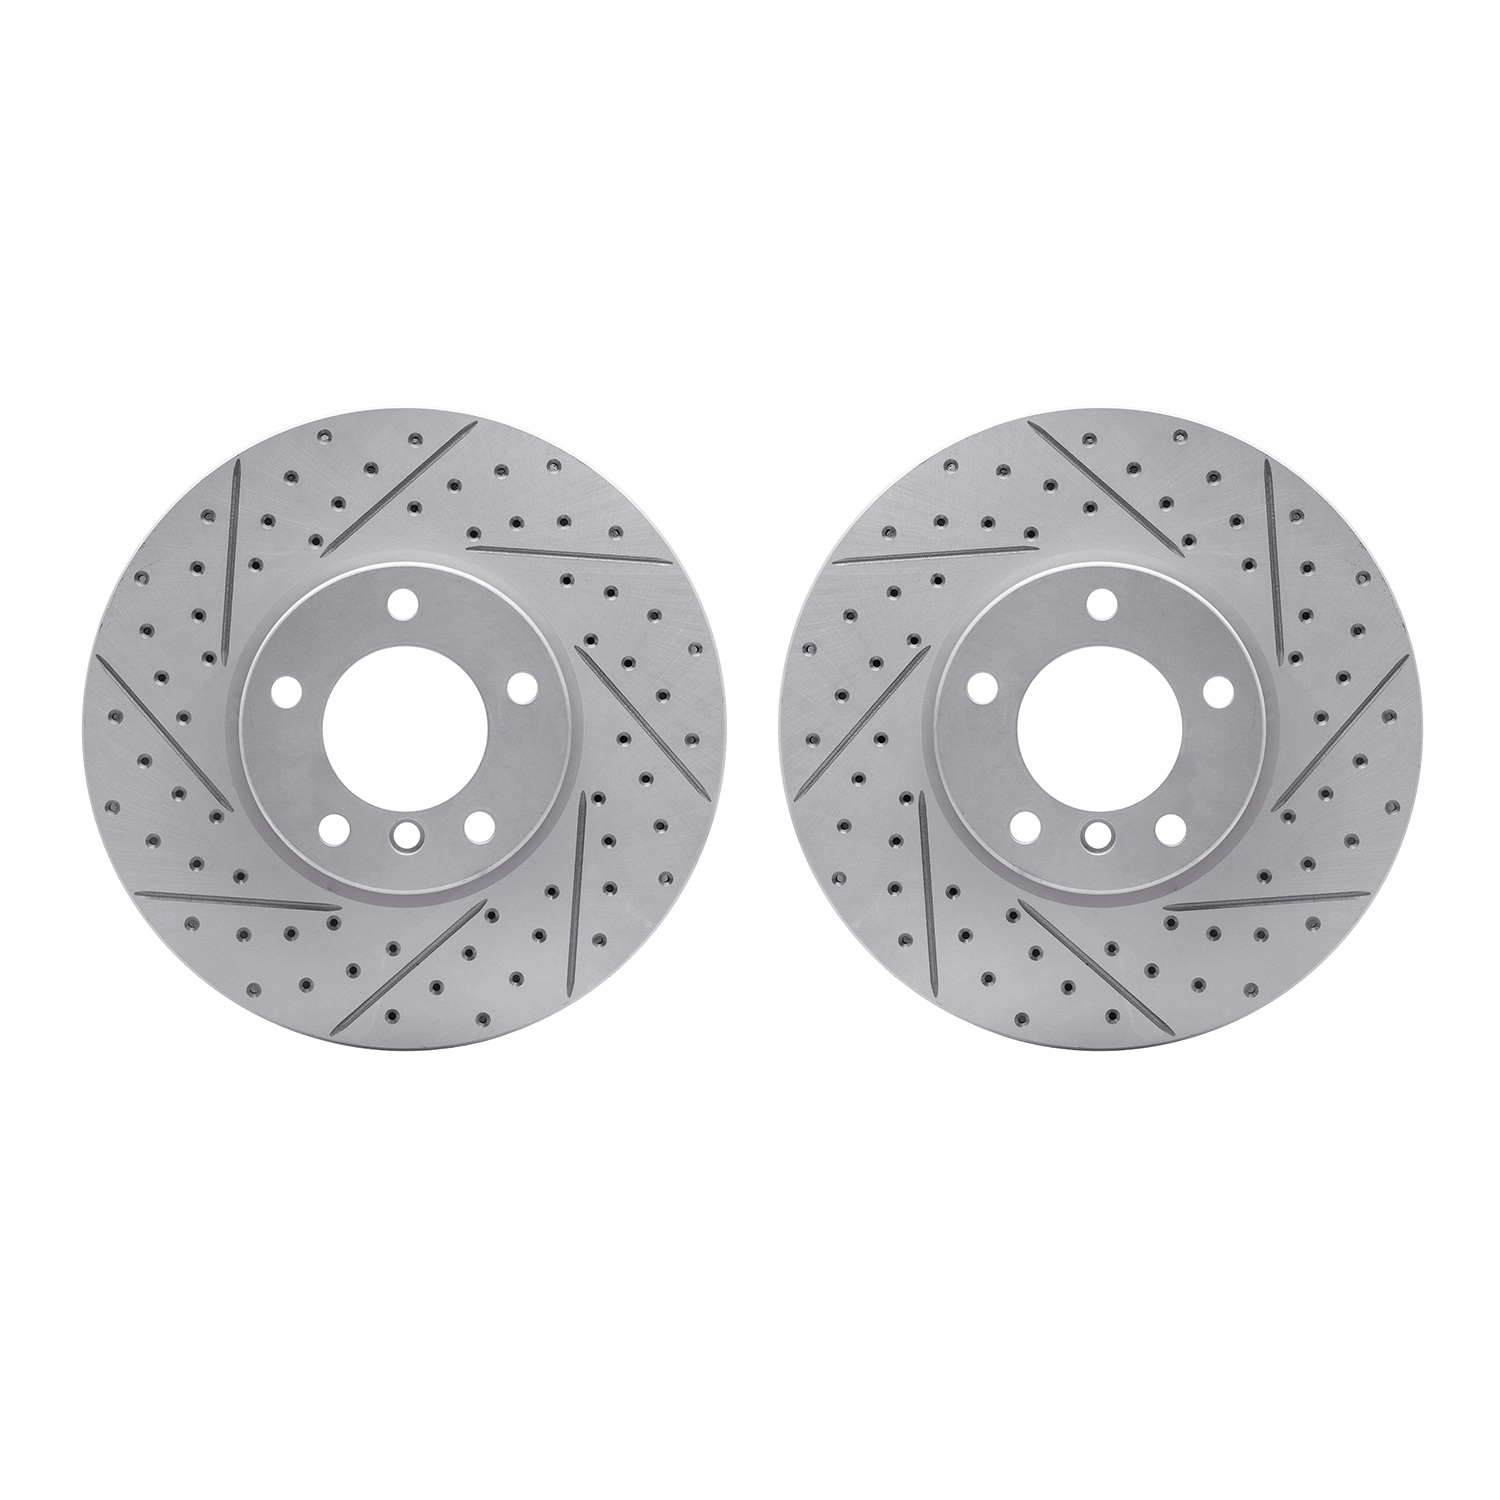 2002-31023 Geoperformance Drilled/Slotted Brake Rotors, 2000-2003 BMW, Position: Front